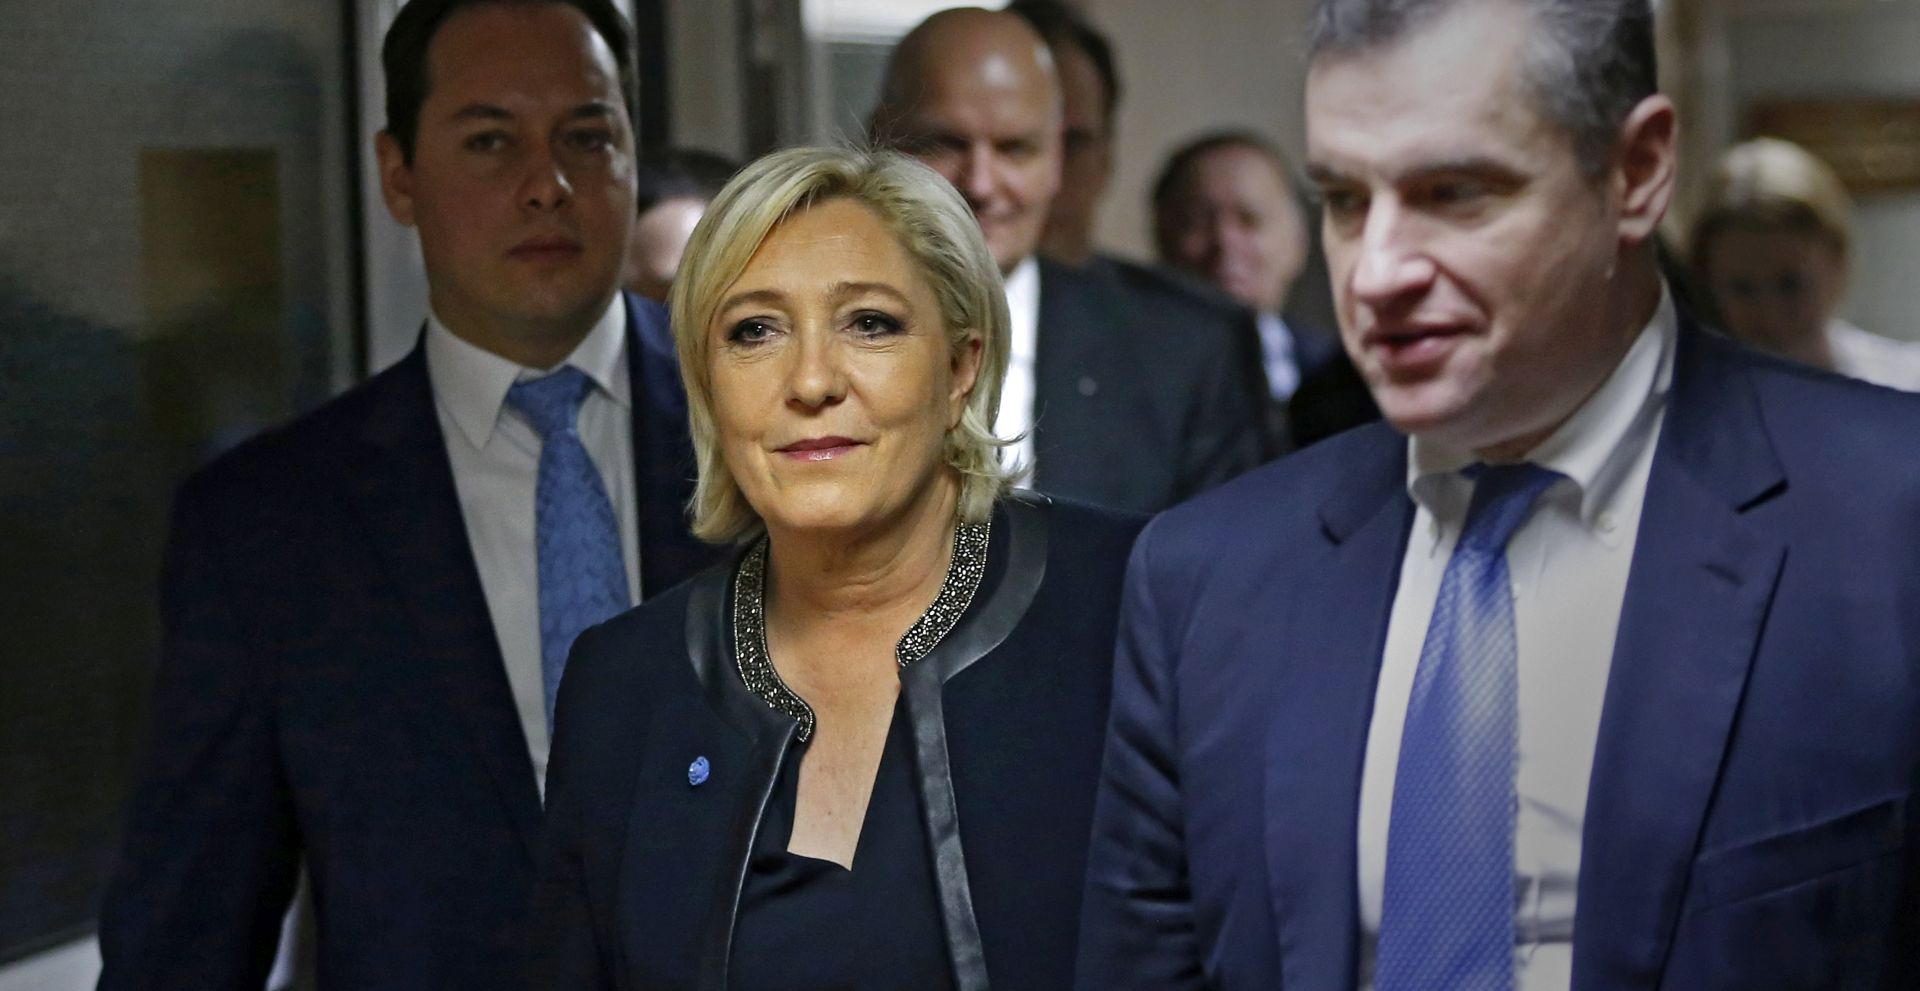 epa05867163 French presidential candidate Marine Le Pen (C) and Russian State Duma international affairs committee head Leonid Slutsky (R) walks during their meeting at the State Duma building in Moscow, Russia, 24 March 2017.  EPA/YURI KOCHETKOV